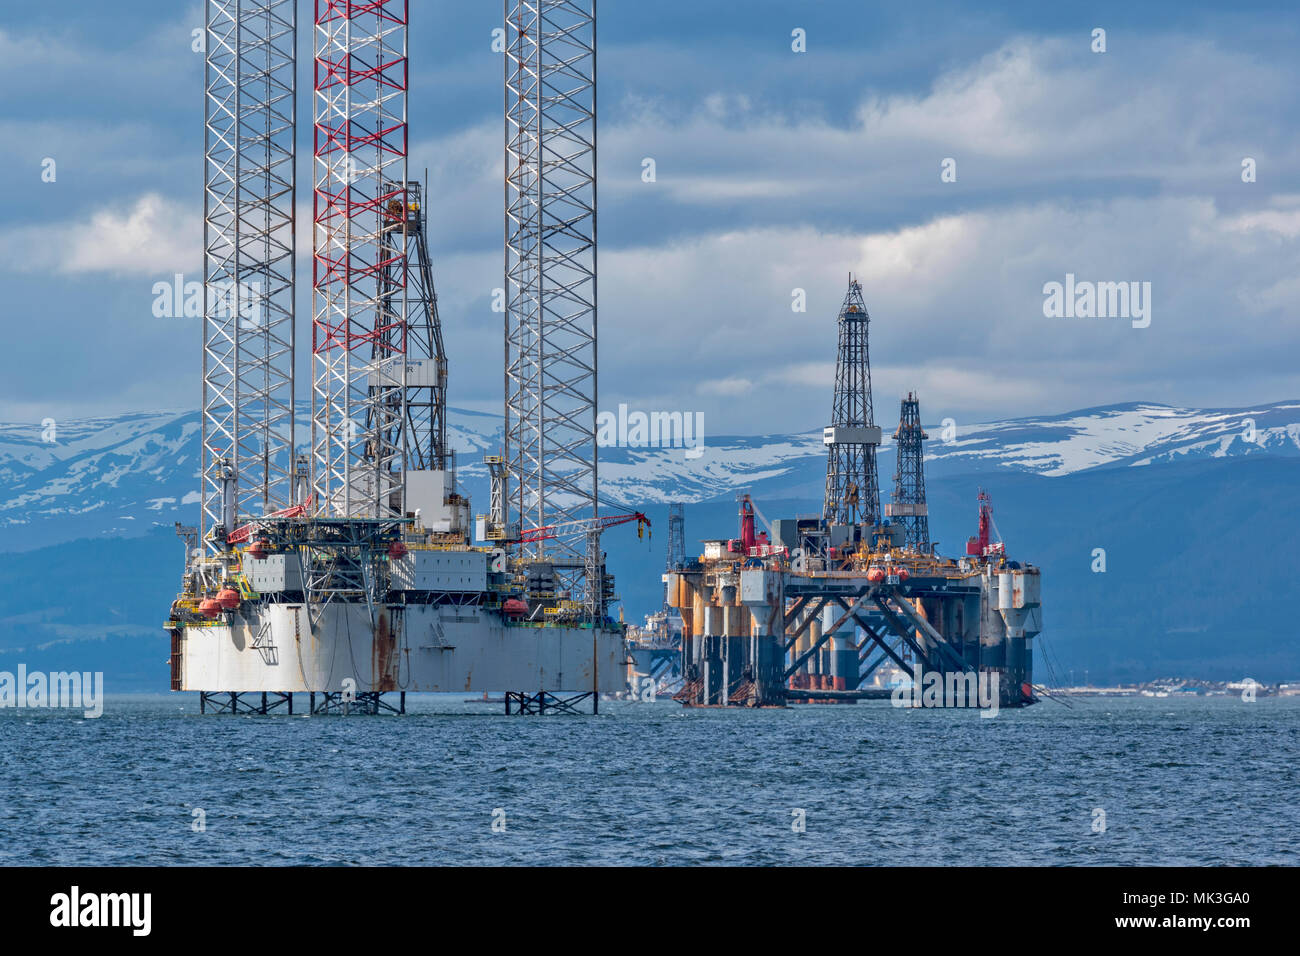 CROMARTY FIRTH SCOTLAND TALL OIL RIG OR DRILLING PLATFORM BAUG WITH DECOMMISSIONED OIL RIG AND SNOW COVERED HILLS Stock Photo